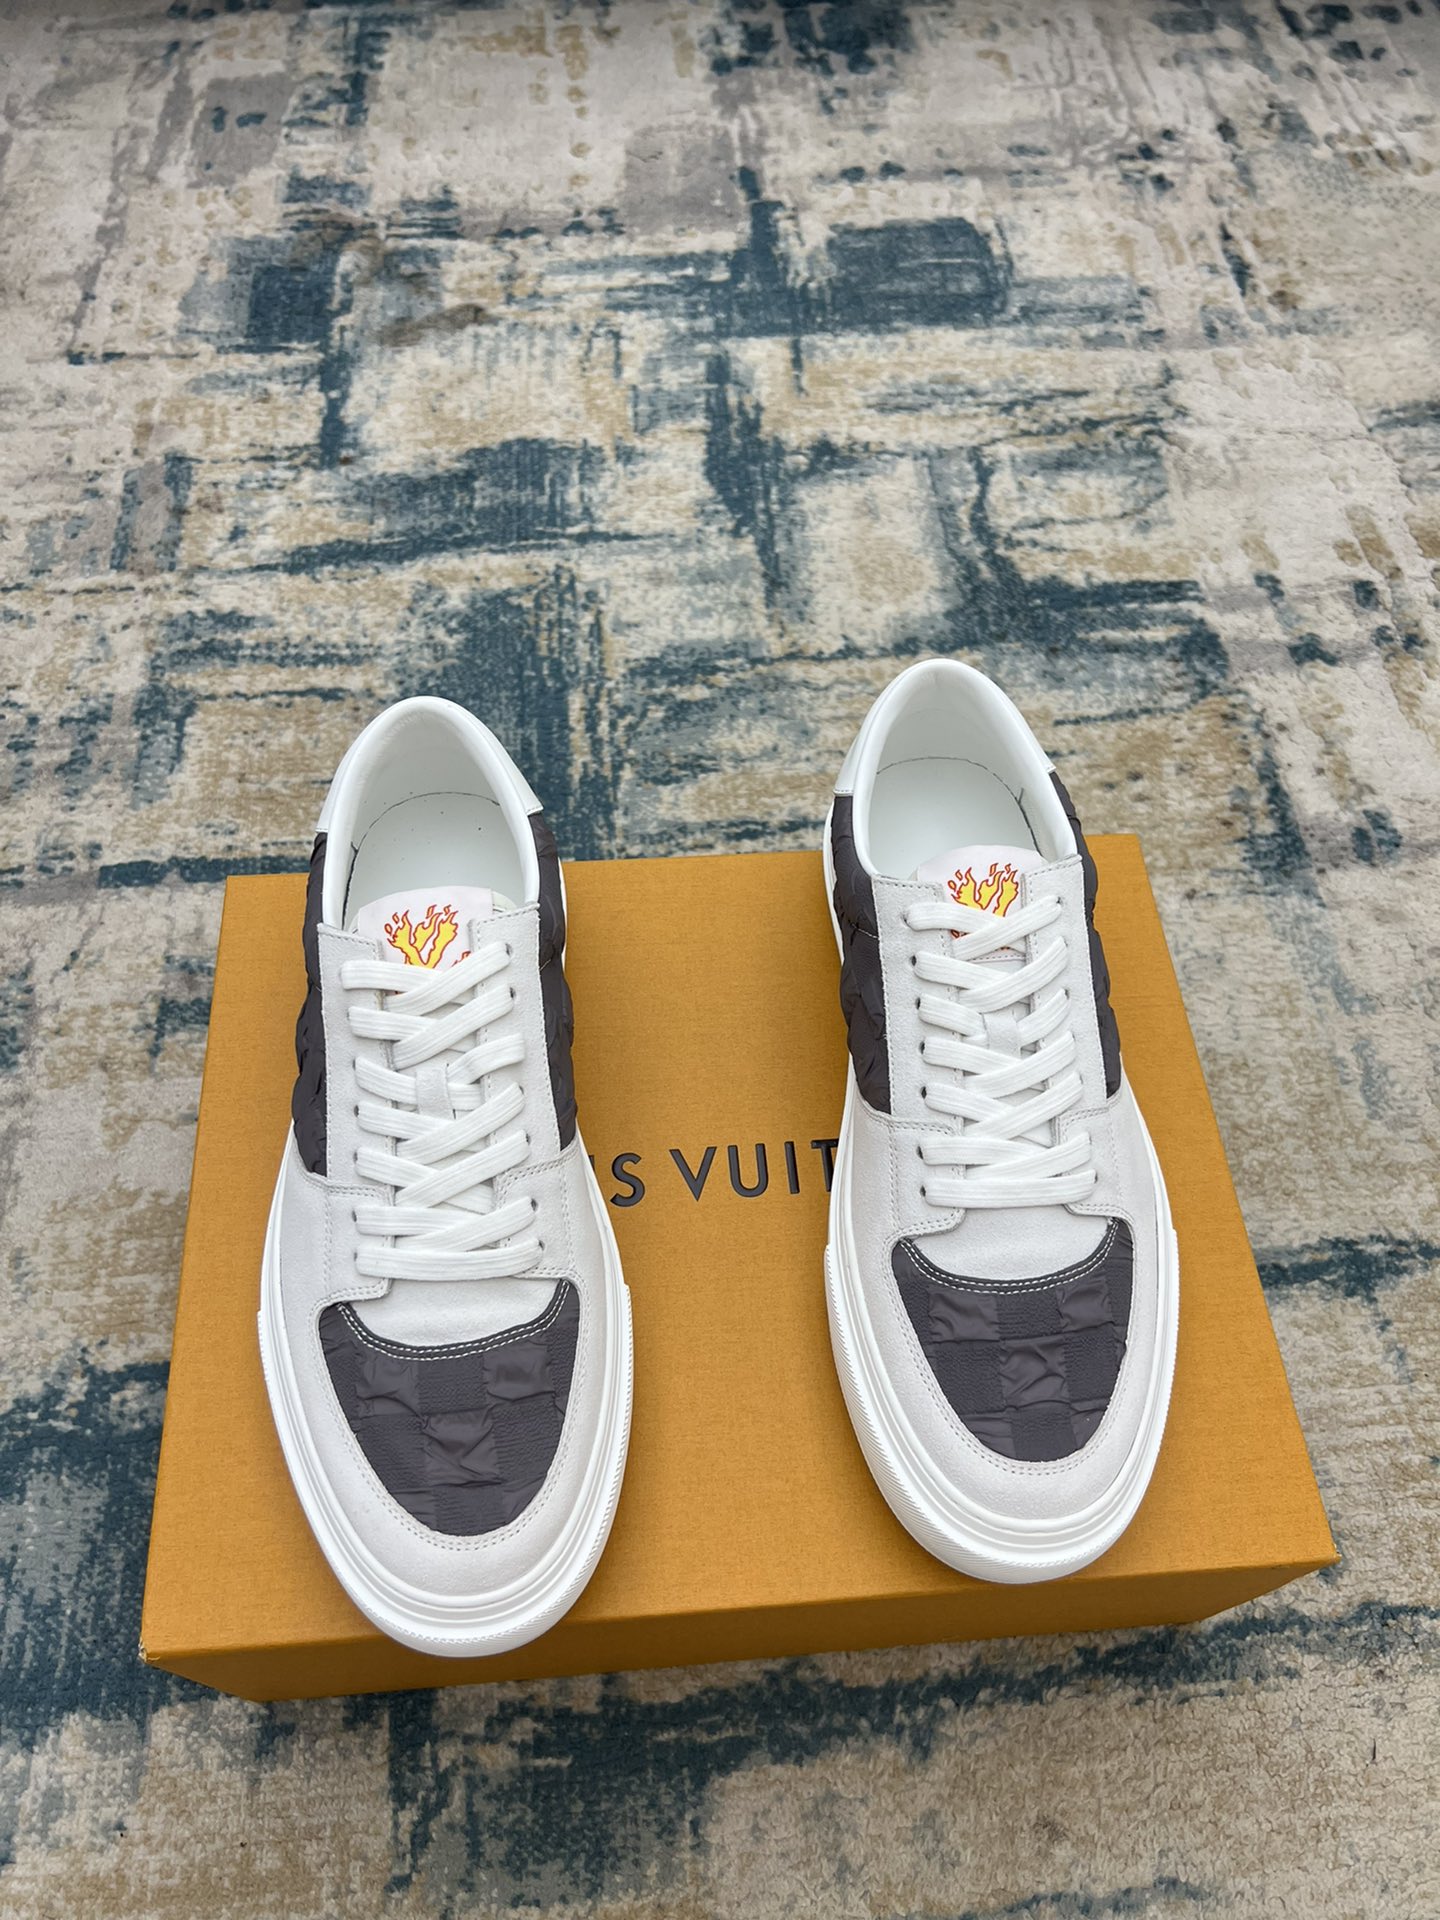 Louis Vuitton Fashion
 Sneakers Casual Shoes Best Replica New Style
 Men Cowhide Rubber Casual